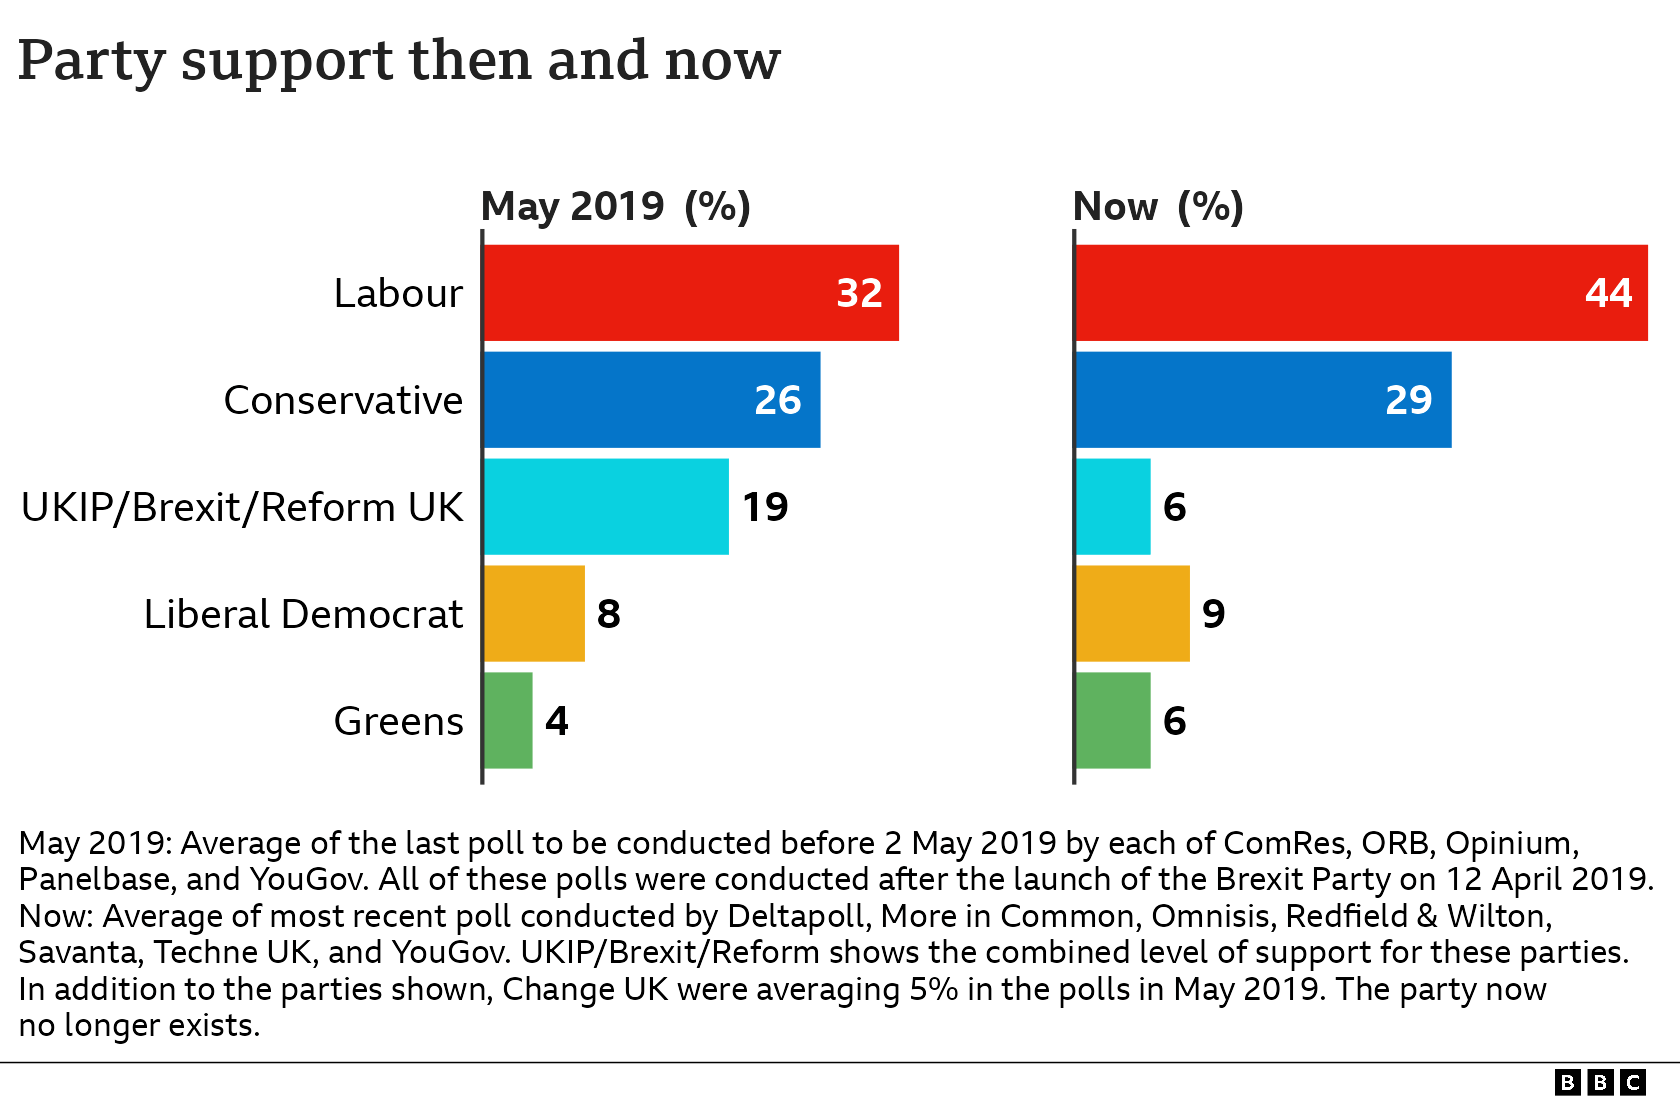 Graphics showing party support in May 2019 and now